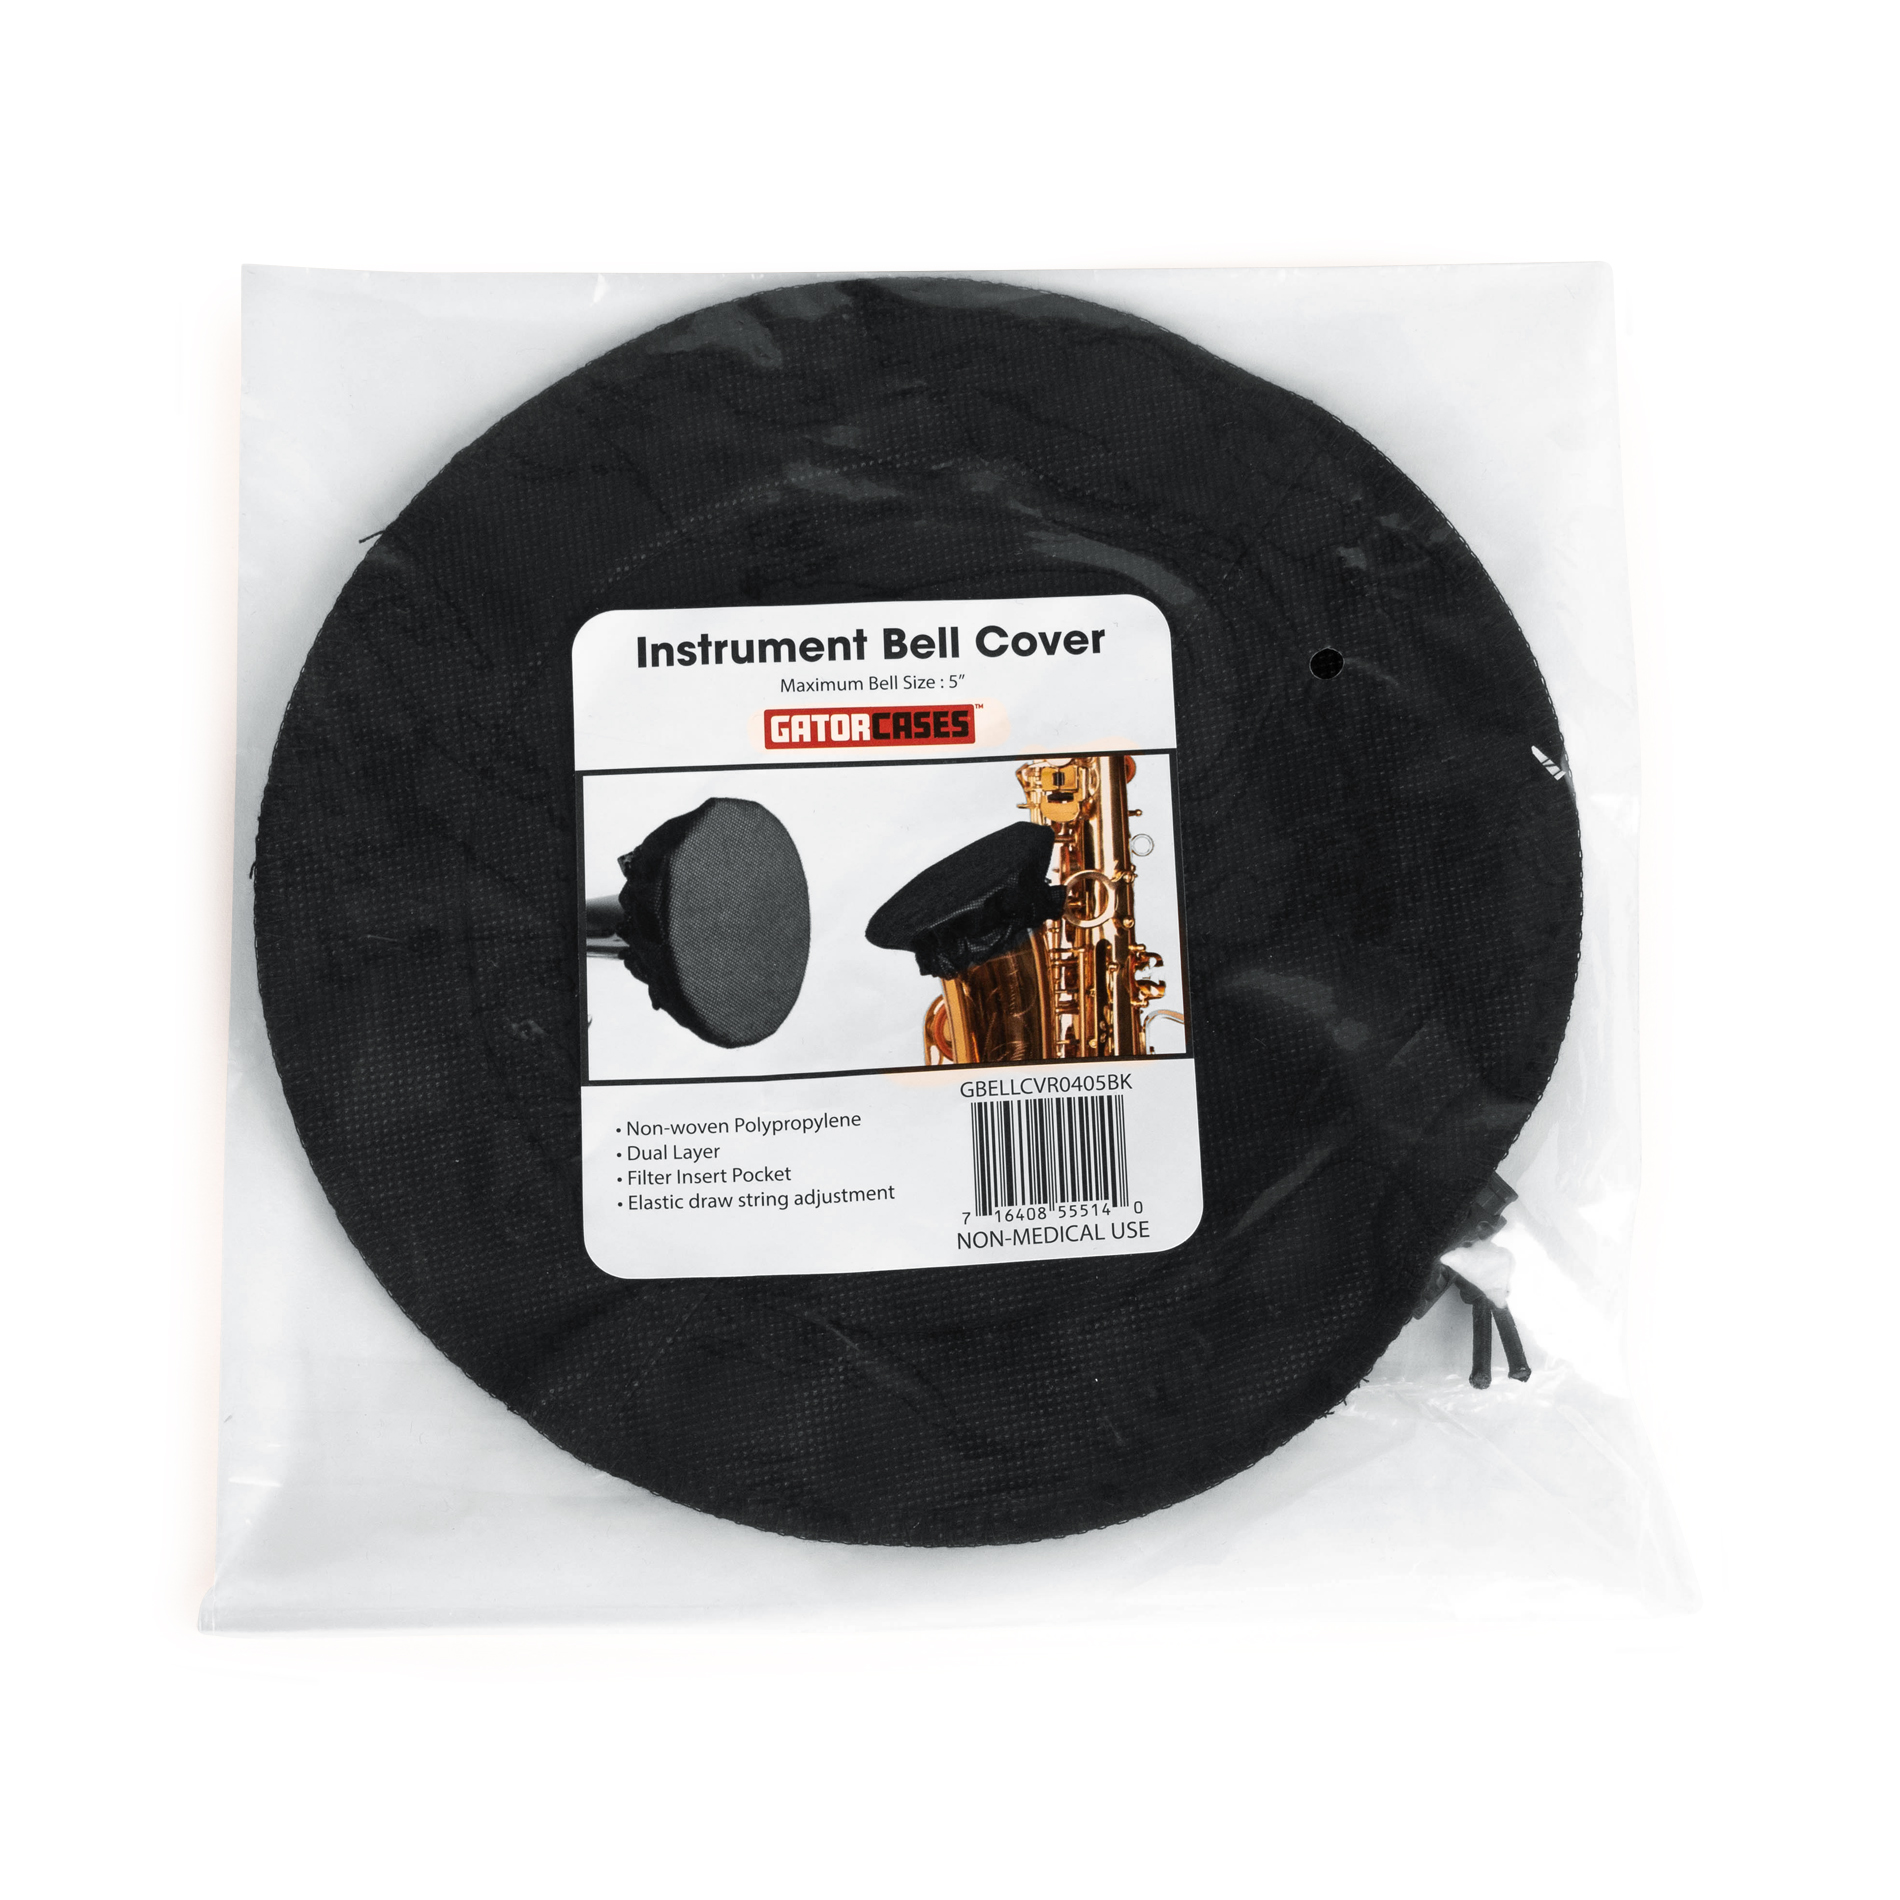 Black Bell Cover With Merv 13 Filter, 2-3 Inches-GBELLCVR0203BK